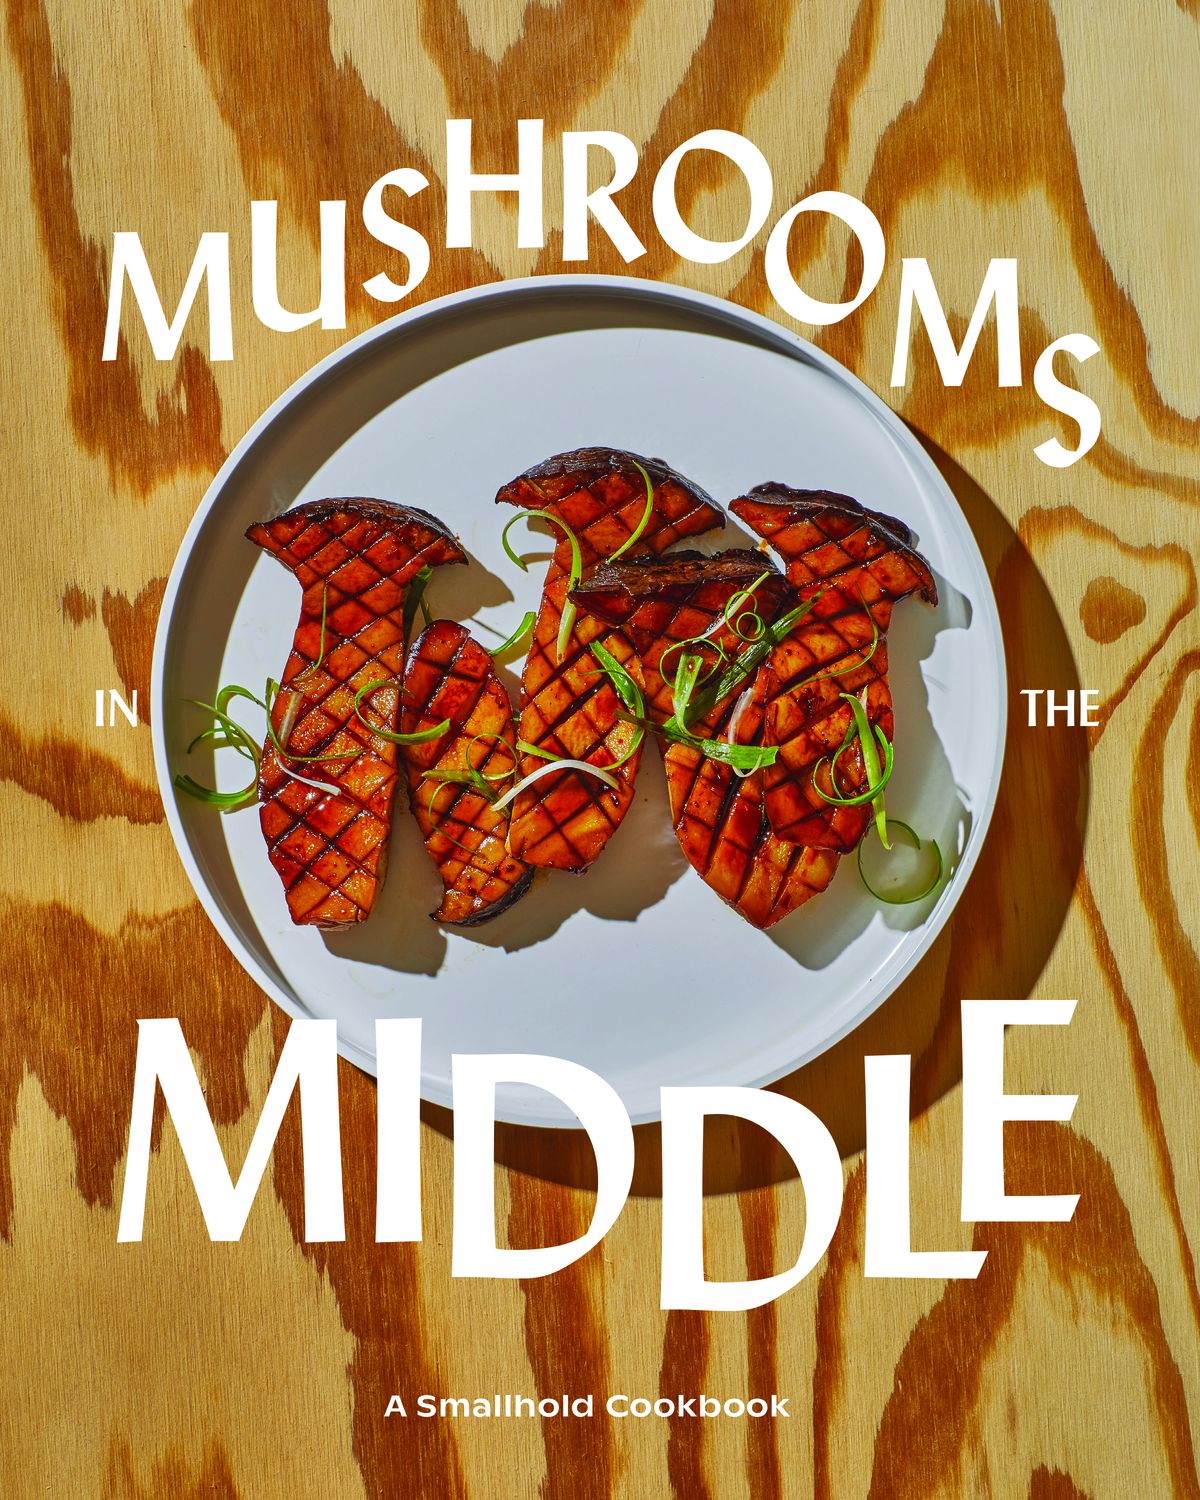 A plate with four seared mushrooms sit on a gray plate with white text of the image that reads “Mushrooms in the Middle.”